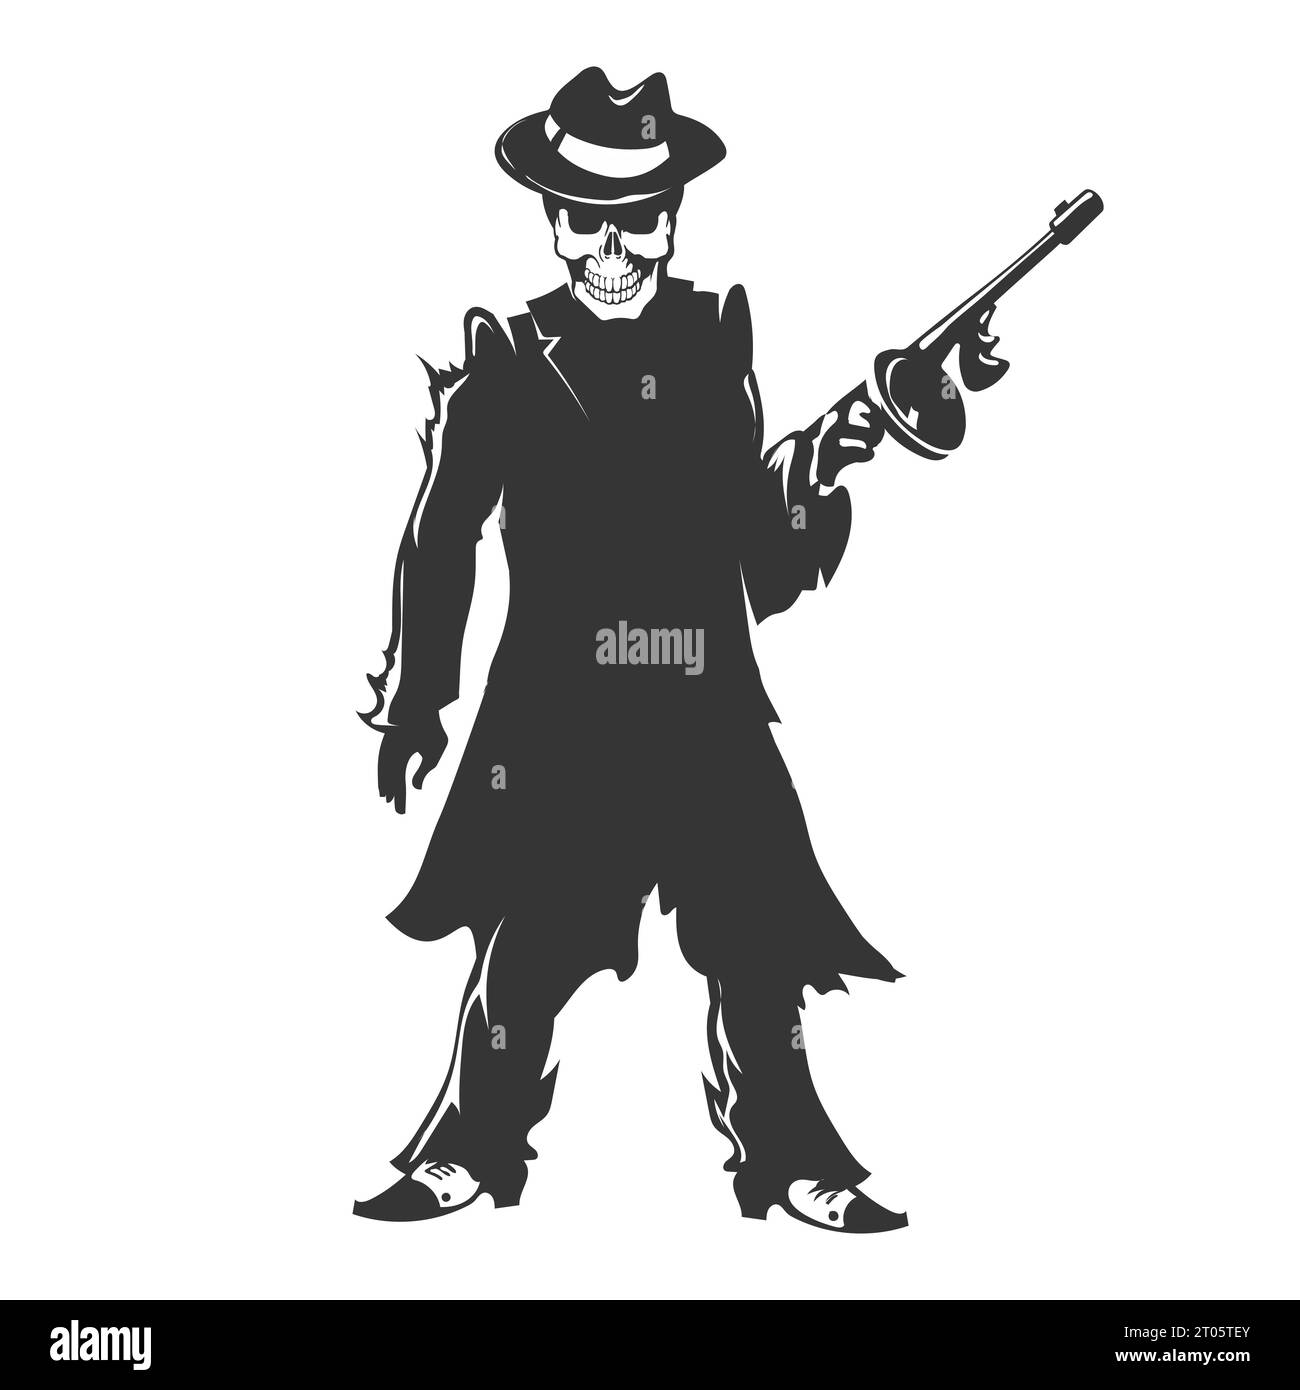 Gangster with Gun. COP with colt. Vector - Stock Illustration [65430575]  - PIXTA